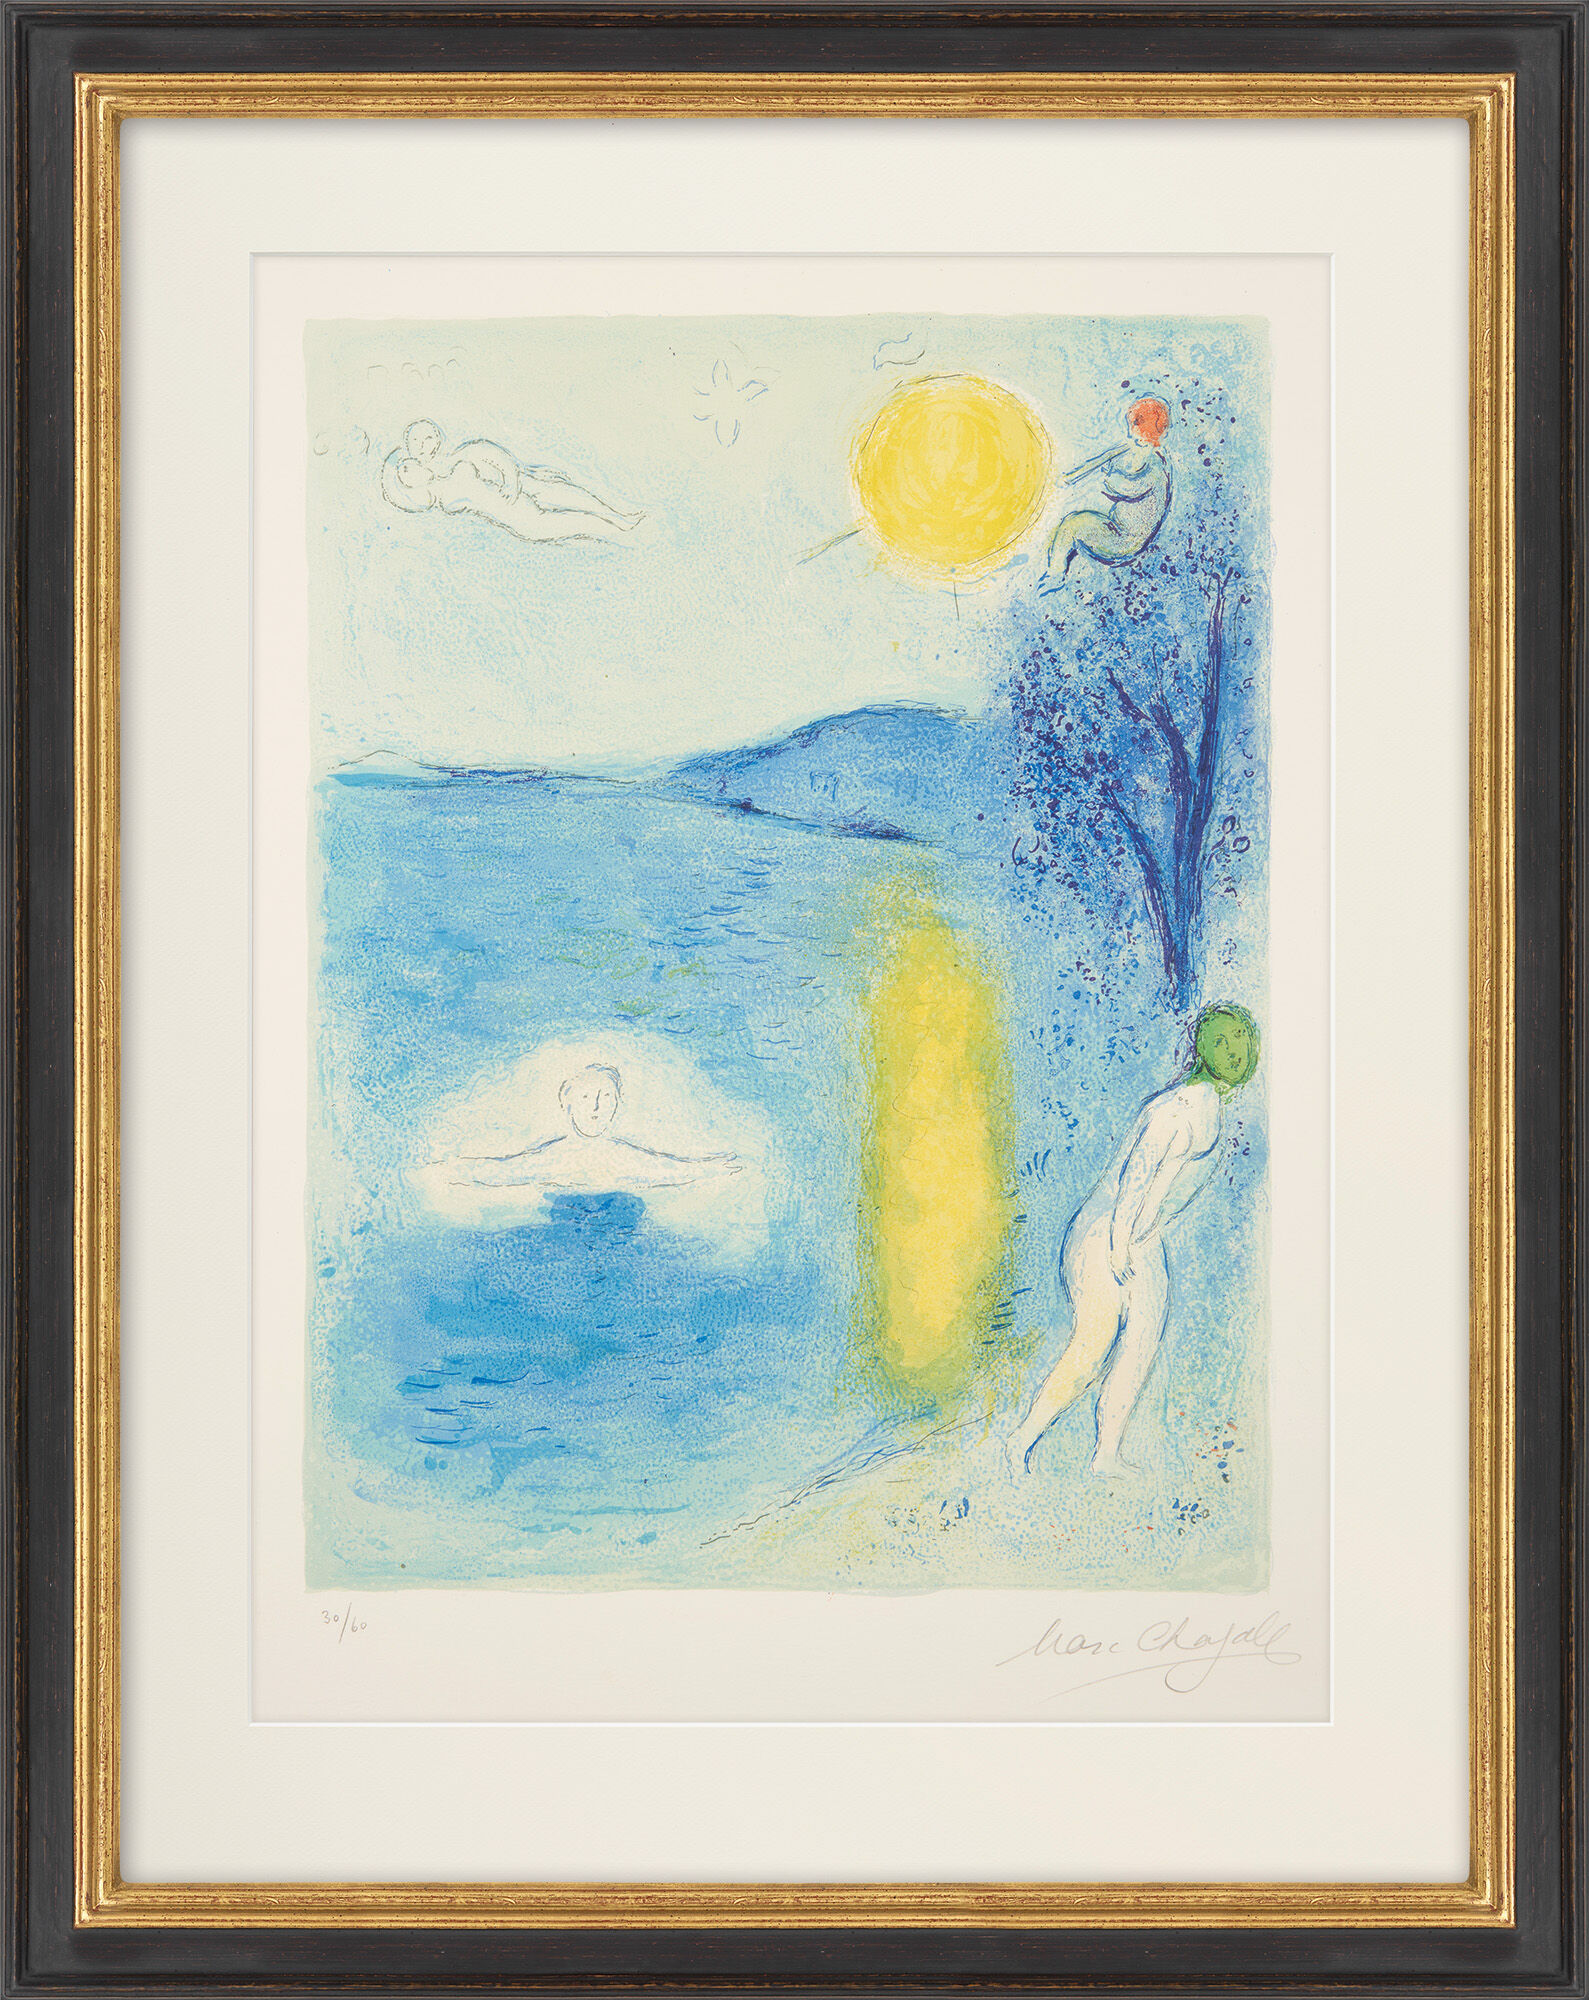 Picture "Summertime ( From the Cycle 'Daphnis and Chloe')" (1961) by Marc Chagall